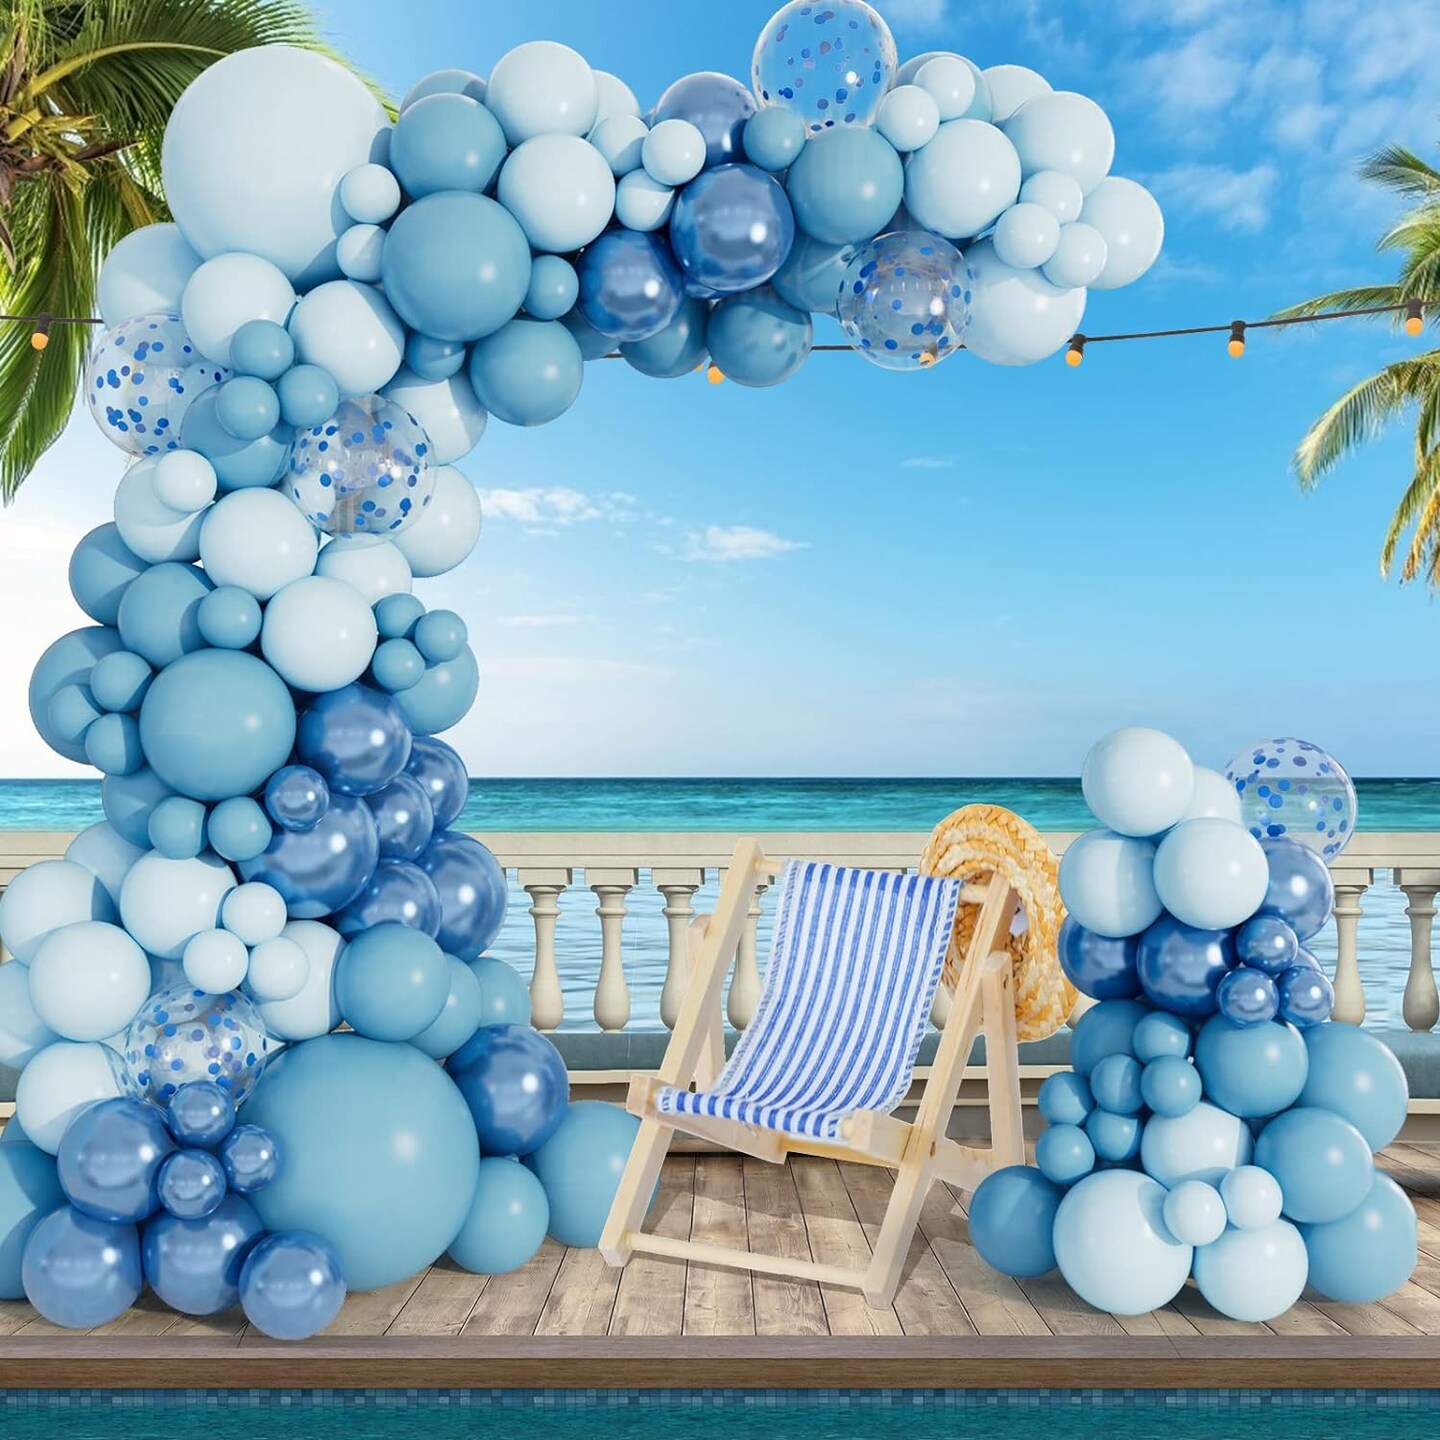 138pcs Blue Balloon Arch Garland Kit with Different Size Metallic Macaron Pastel Blue Confetti Balloons for Baby Shower Birthday Wedding Ocean Themed Party. Background Party Decoration